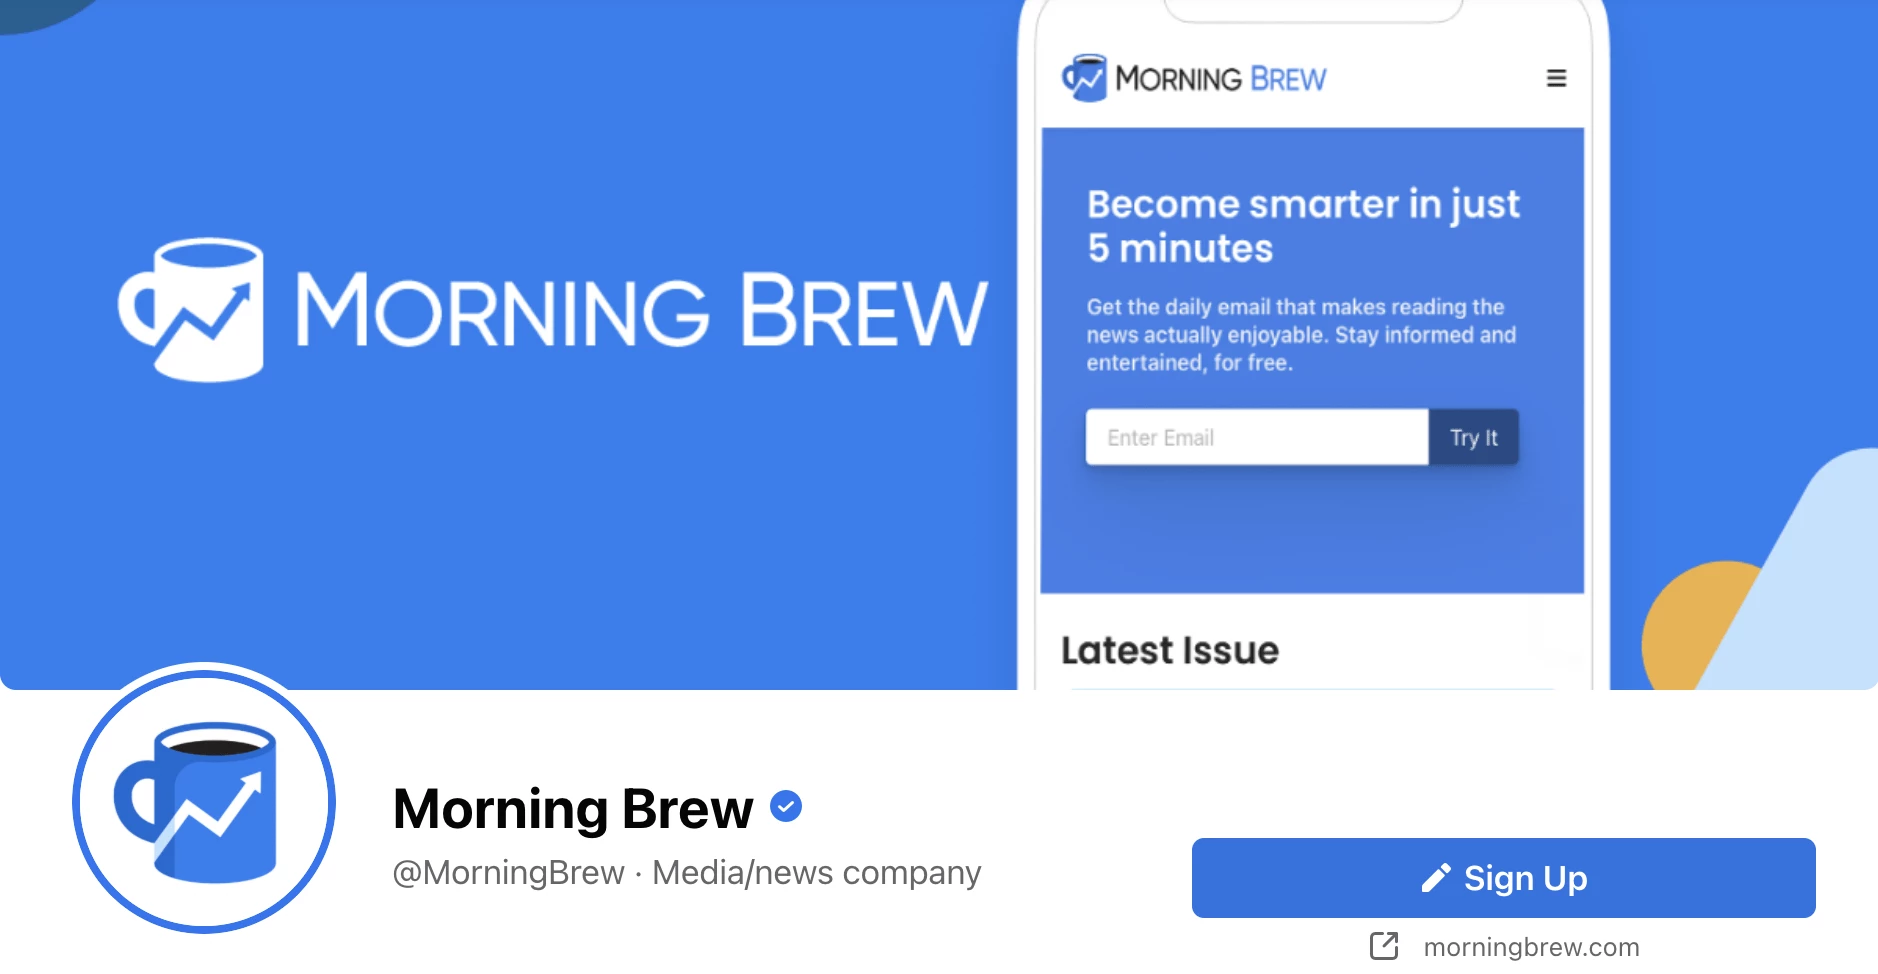 morning brew facebook cover promotion newsletter with sign up button